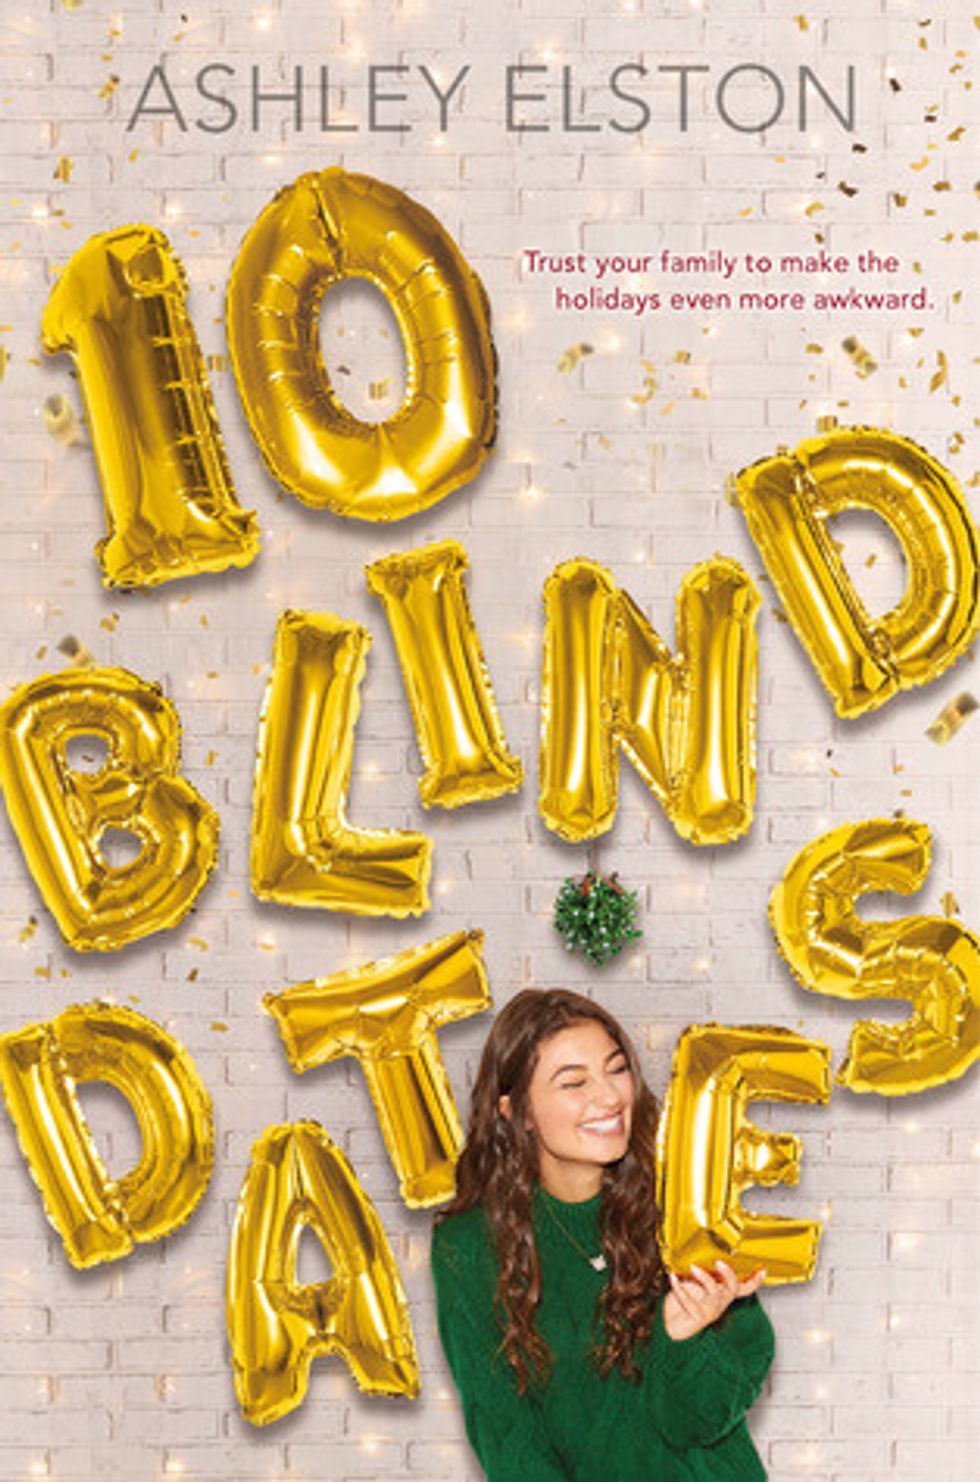 10 Reasons You Should Read "10 Blind Dates"